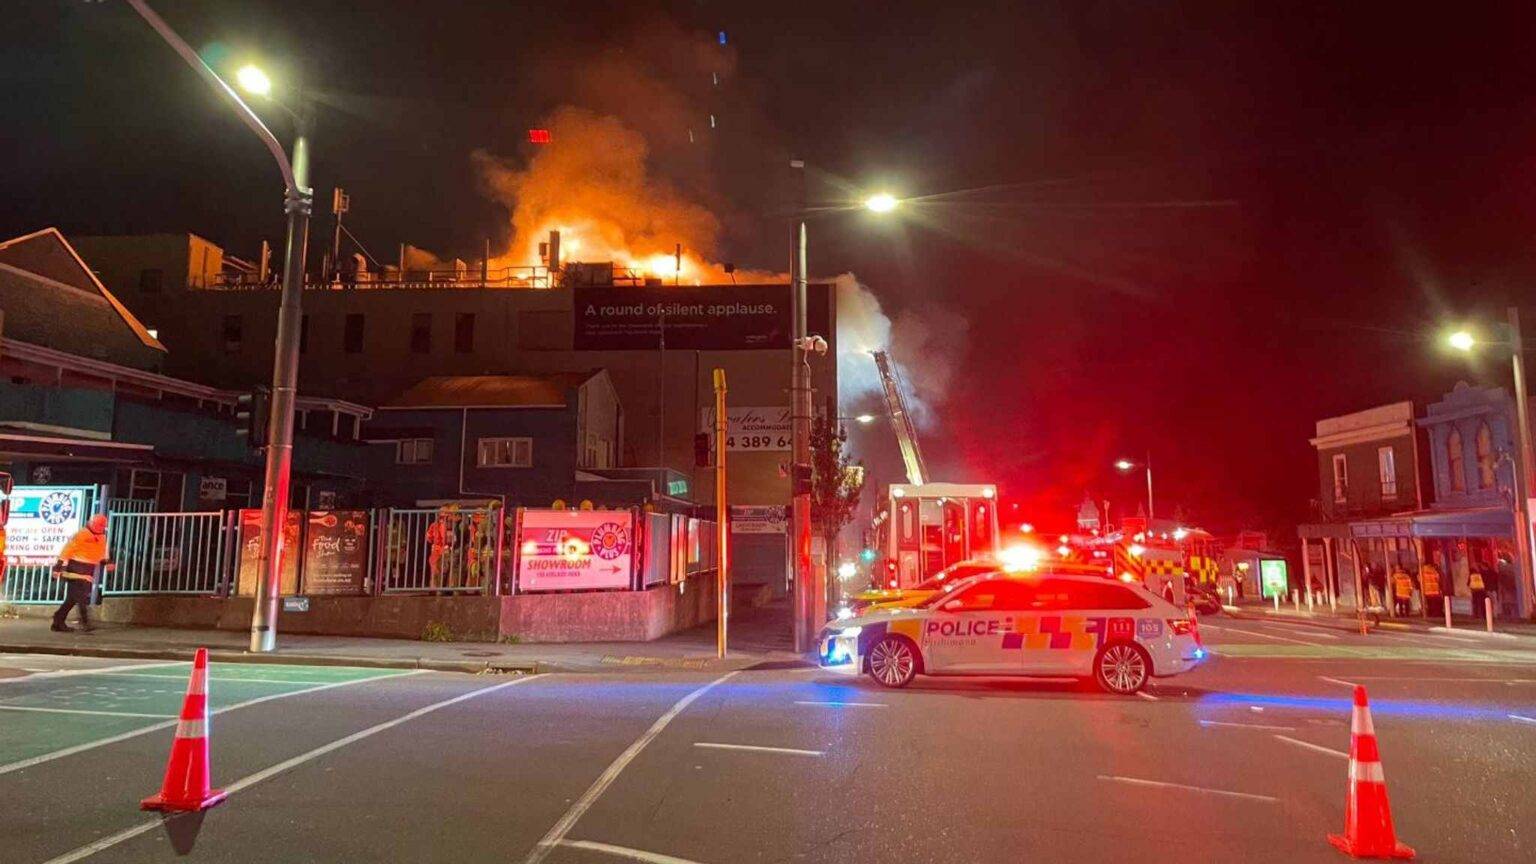 At least 6 dead in New Zealand hostel fire and others still unaccounted for 